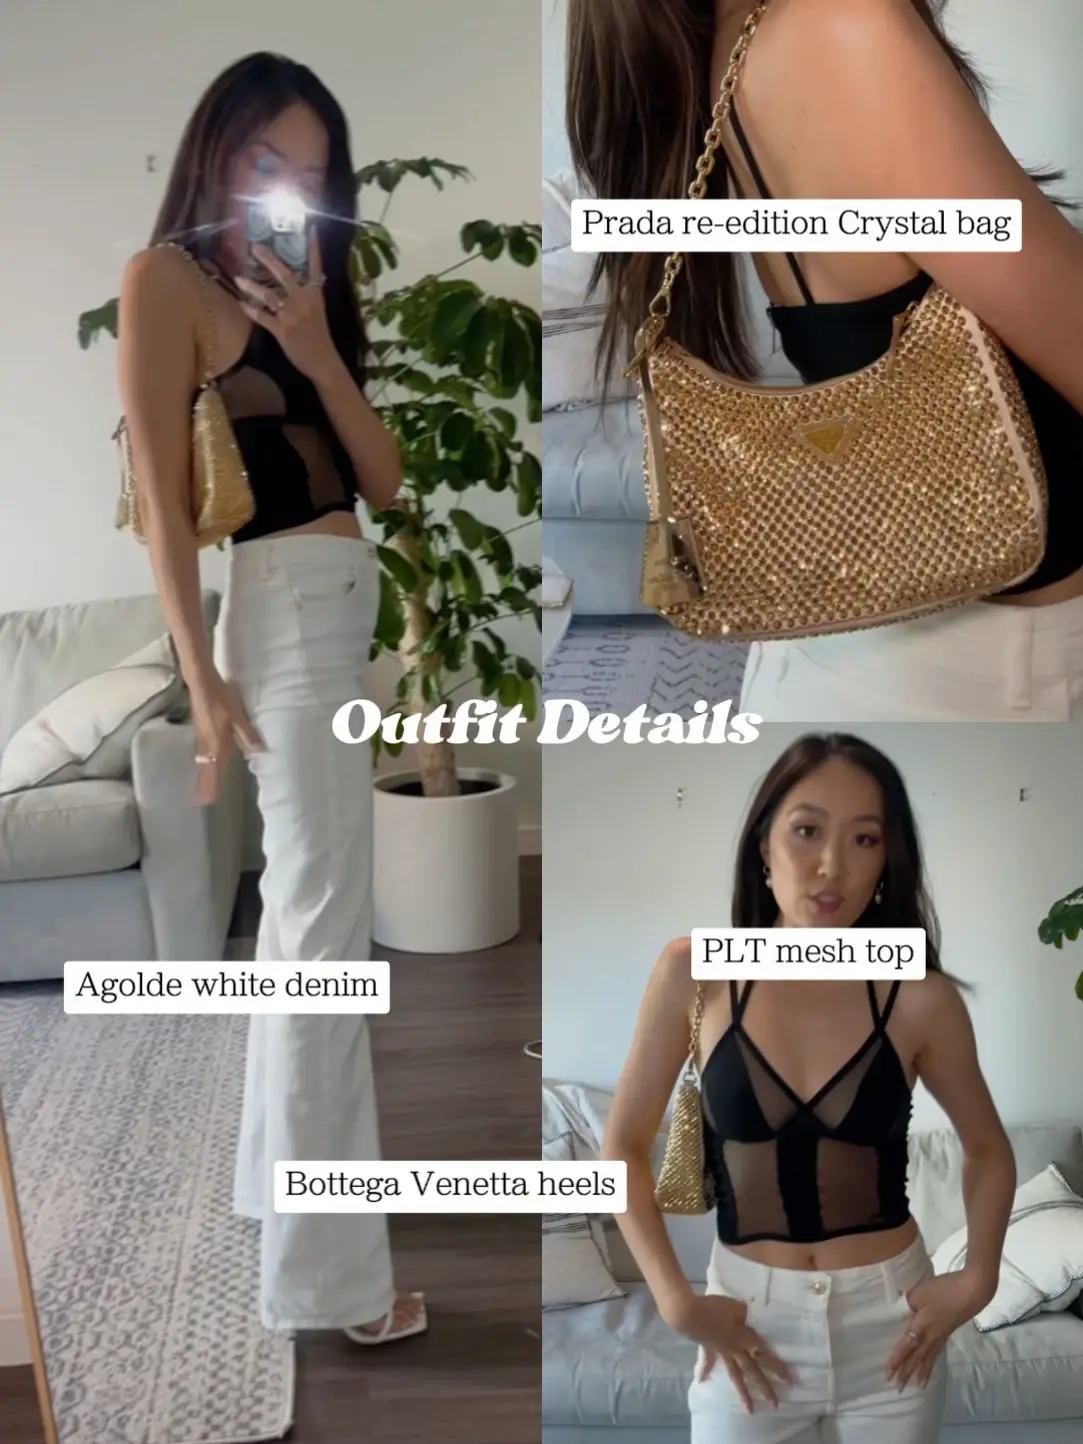 CYBER Y2K HAUL // Where to find the best pieces//boohoo, plt,  + more 